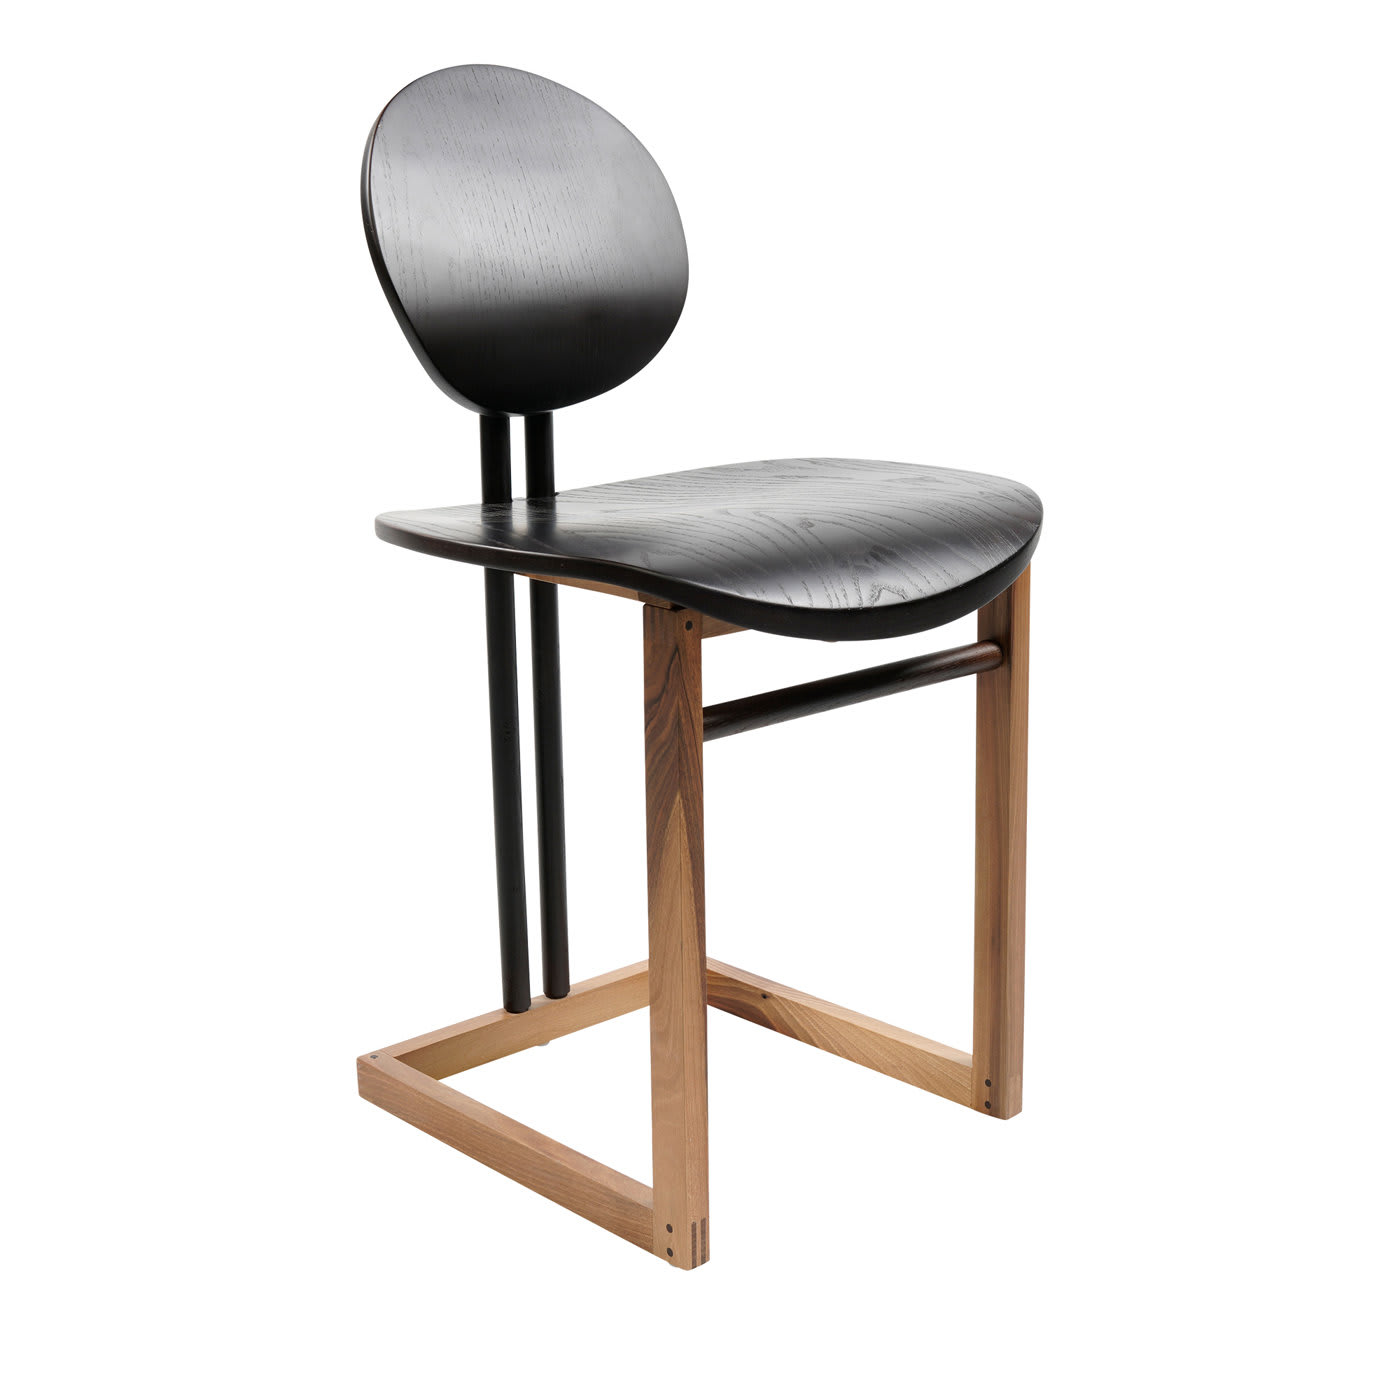 Luna dining chair - Secolo